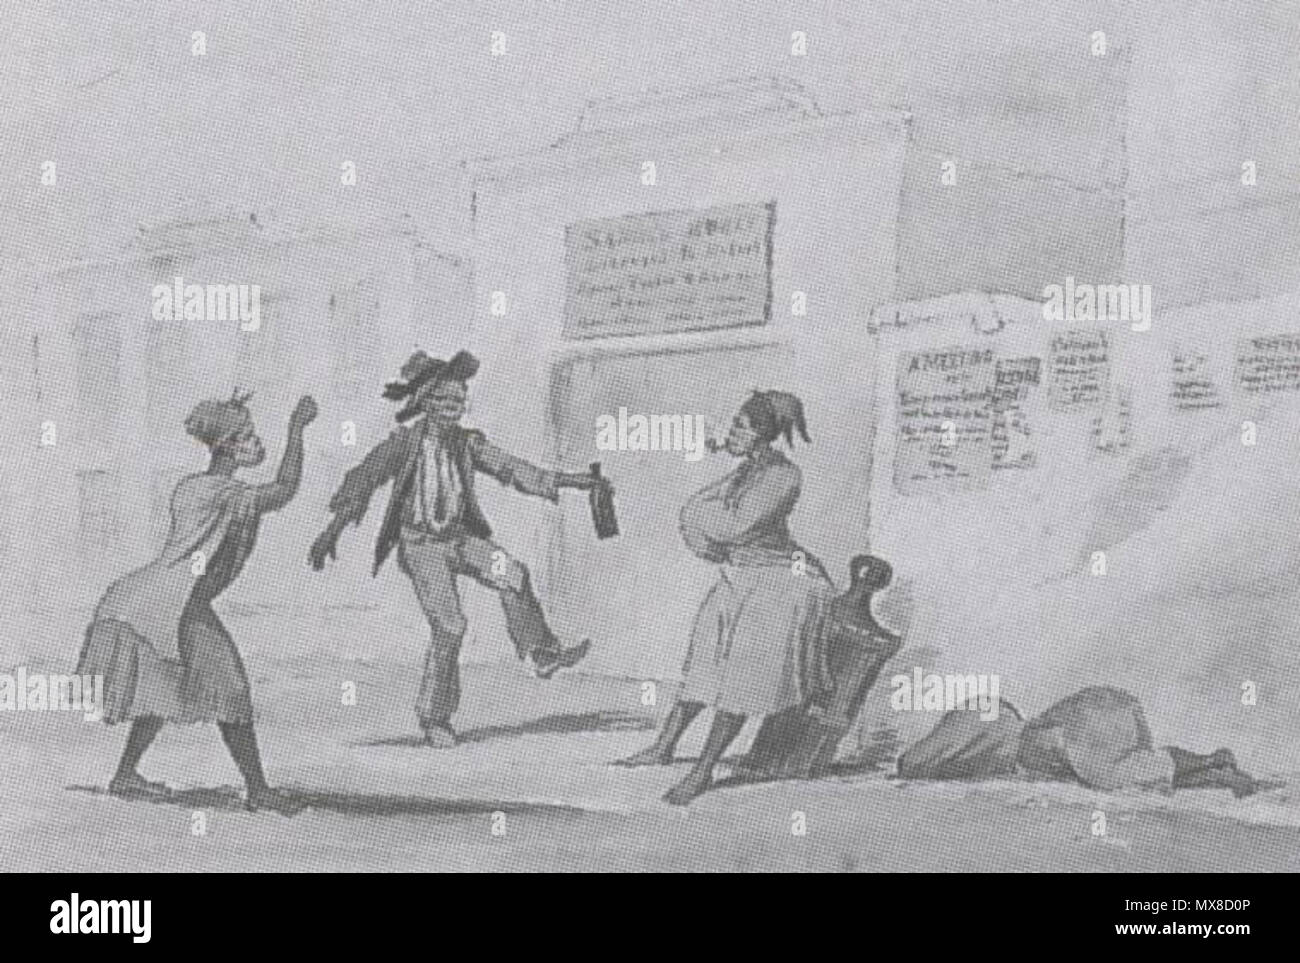 . English: A group of inebriated homeless people in Cape Town. Drawn by Charles Bell the anti-alcohol campaigner. Cape Colony. 1839.   Charles Bell  (1774–1842)       Alternative names Signe de Charles Bell; Bell's Law; Bell-Magendie law; Bell-Magendie's Law; Batas na Bell at Magendie; Gat Charles Bell; Batas ni Charles Bell; Bell Law; Ginoong Charles Bell; Batas Charles Bell; Batas Bell at Magendie; G. Charles Bell; Law of Bell and Magendie; Sir Charles Bell; Batas na Bell-Magendie; Batas Bell Magendie; Batas Bell-Magendie; Bell; Sir Bell  Description British anatomist, neuroscientist, surgeo Stock Photo